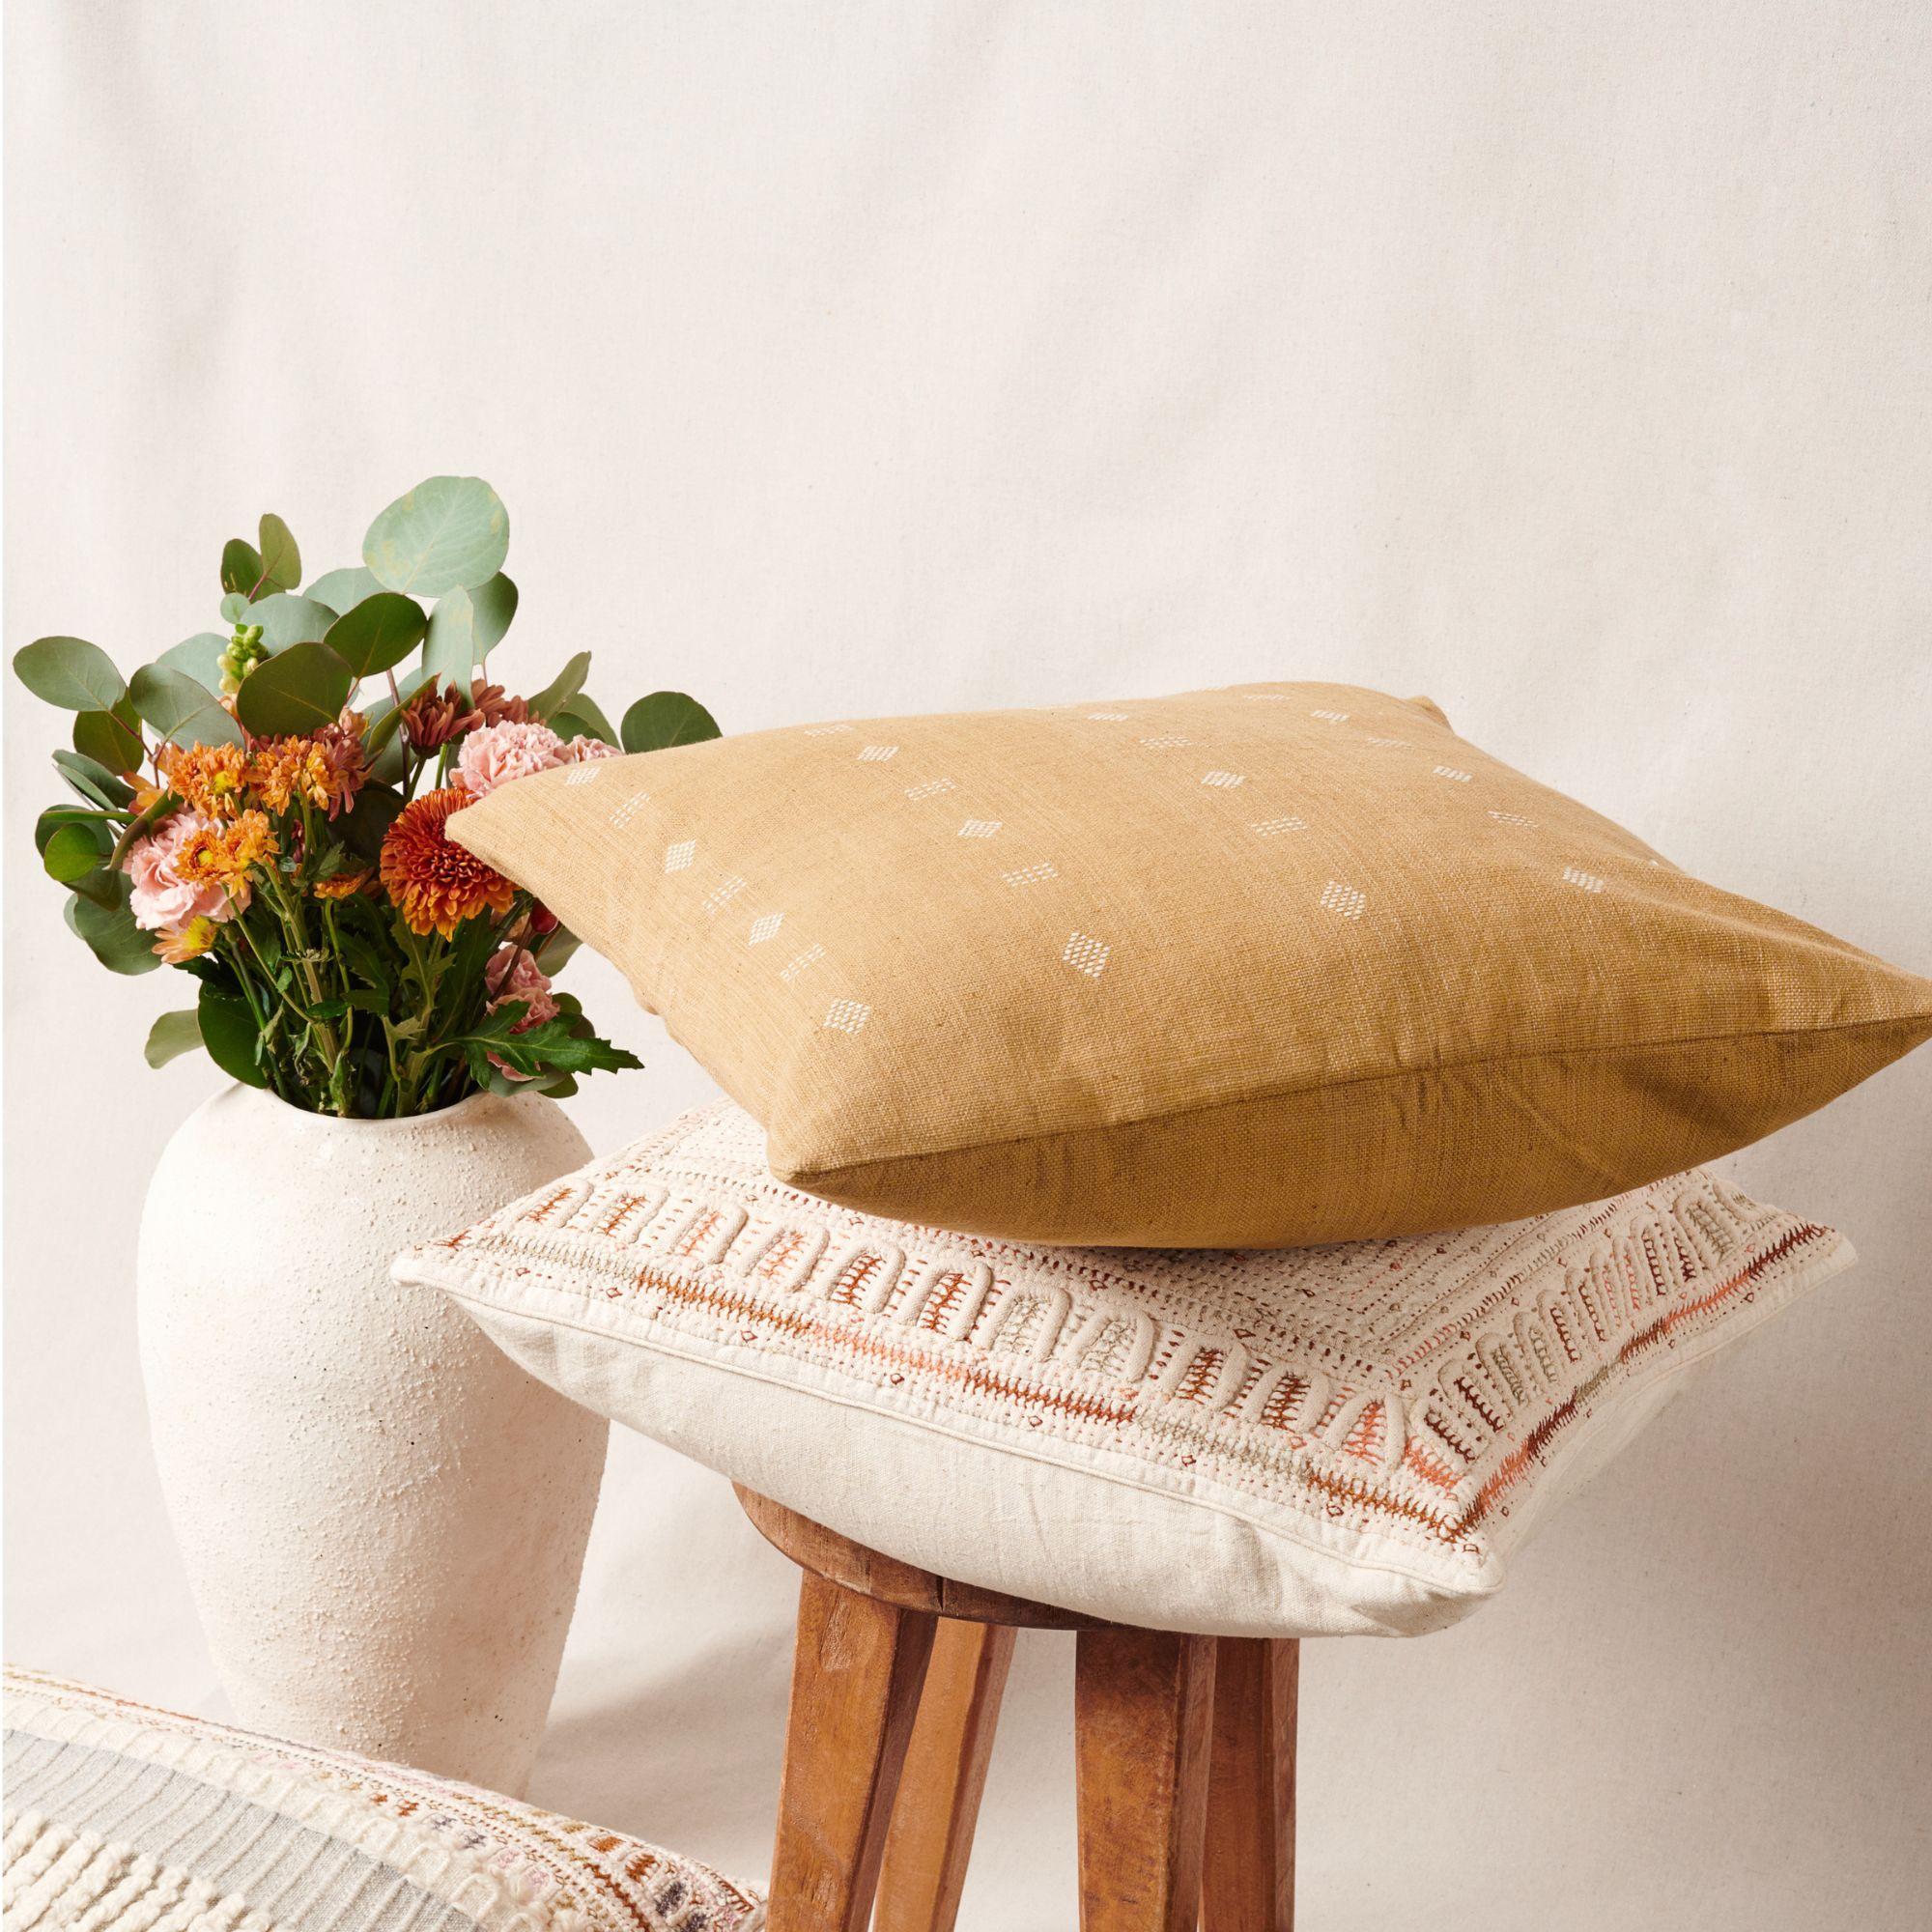 Nira Ochre Pillow is a slightly textured handwoven pillow where our artisans have skillfully created a classic pattern using an ancient weaving technique. Undyed yarn is used as a design element with the backdrop of pleasant hues of ochre yellow.